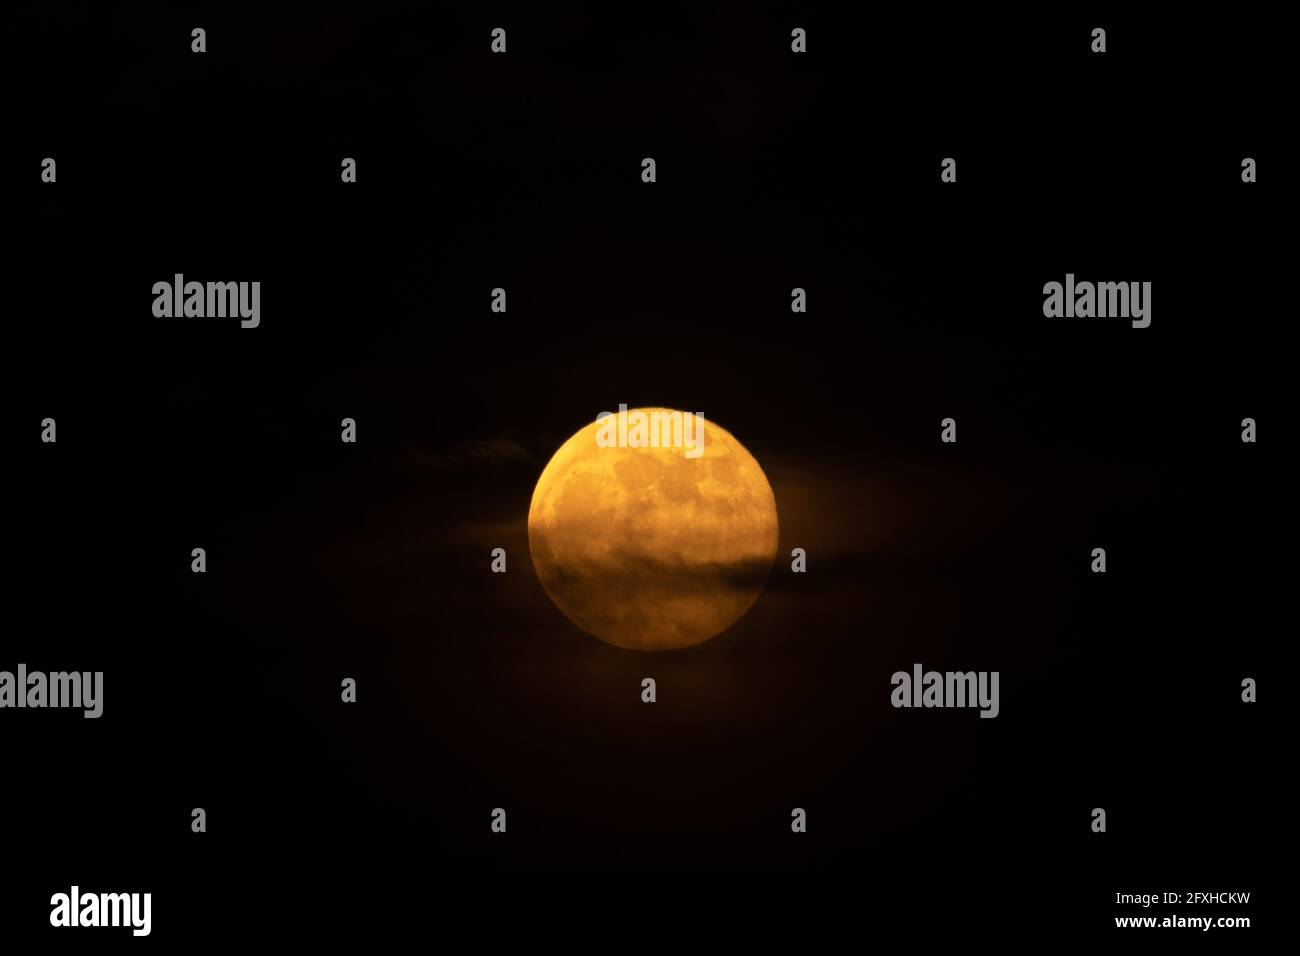 Orange full moon on black night sky. Blood moon. Flower moon. Lunar eclipse. Astronomy and astronomical concept. Stock Photo